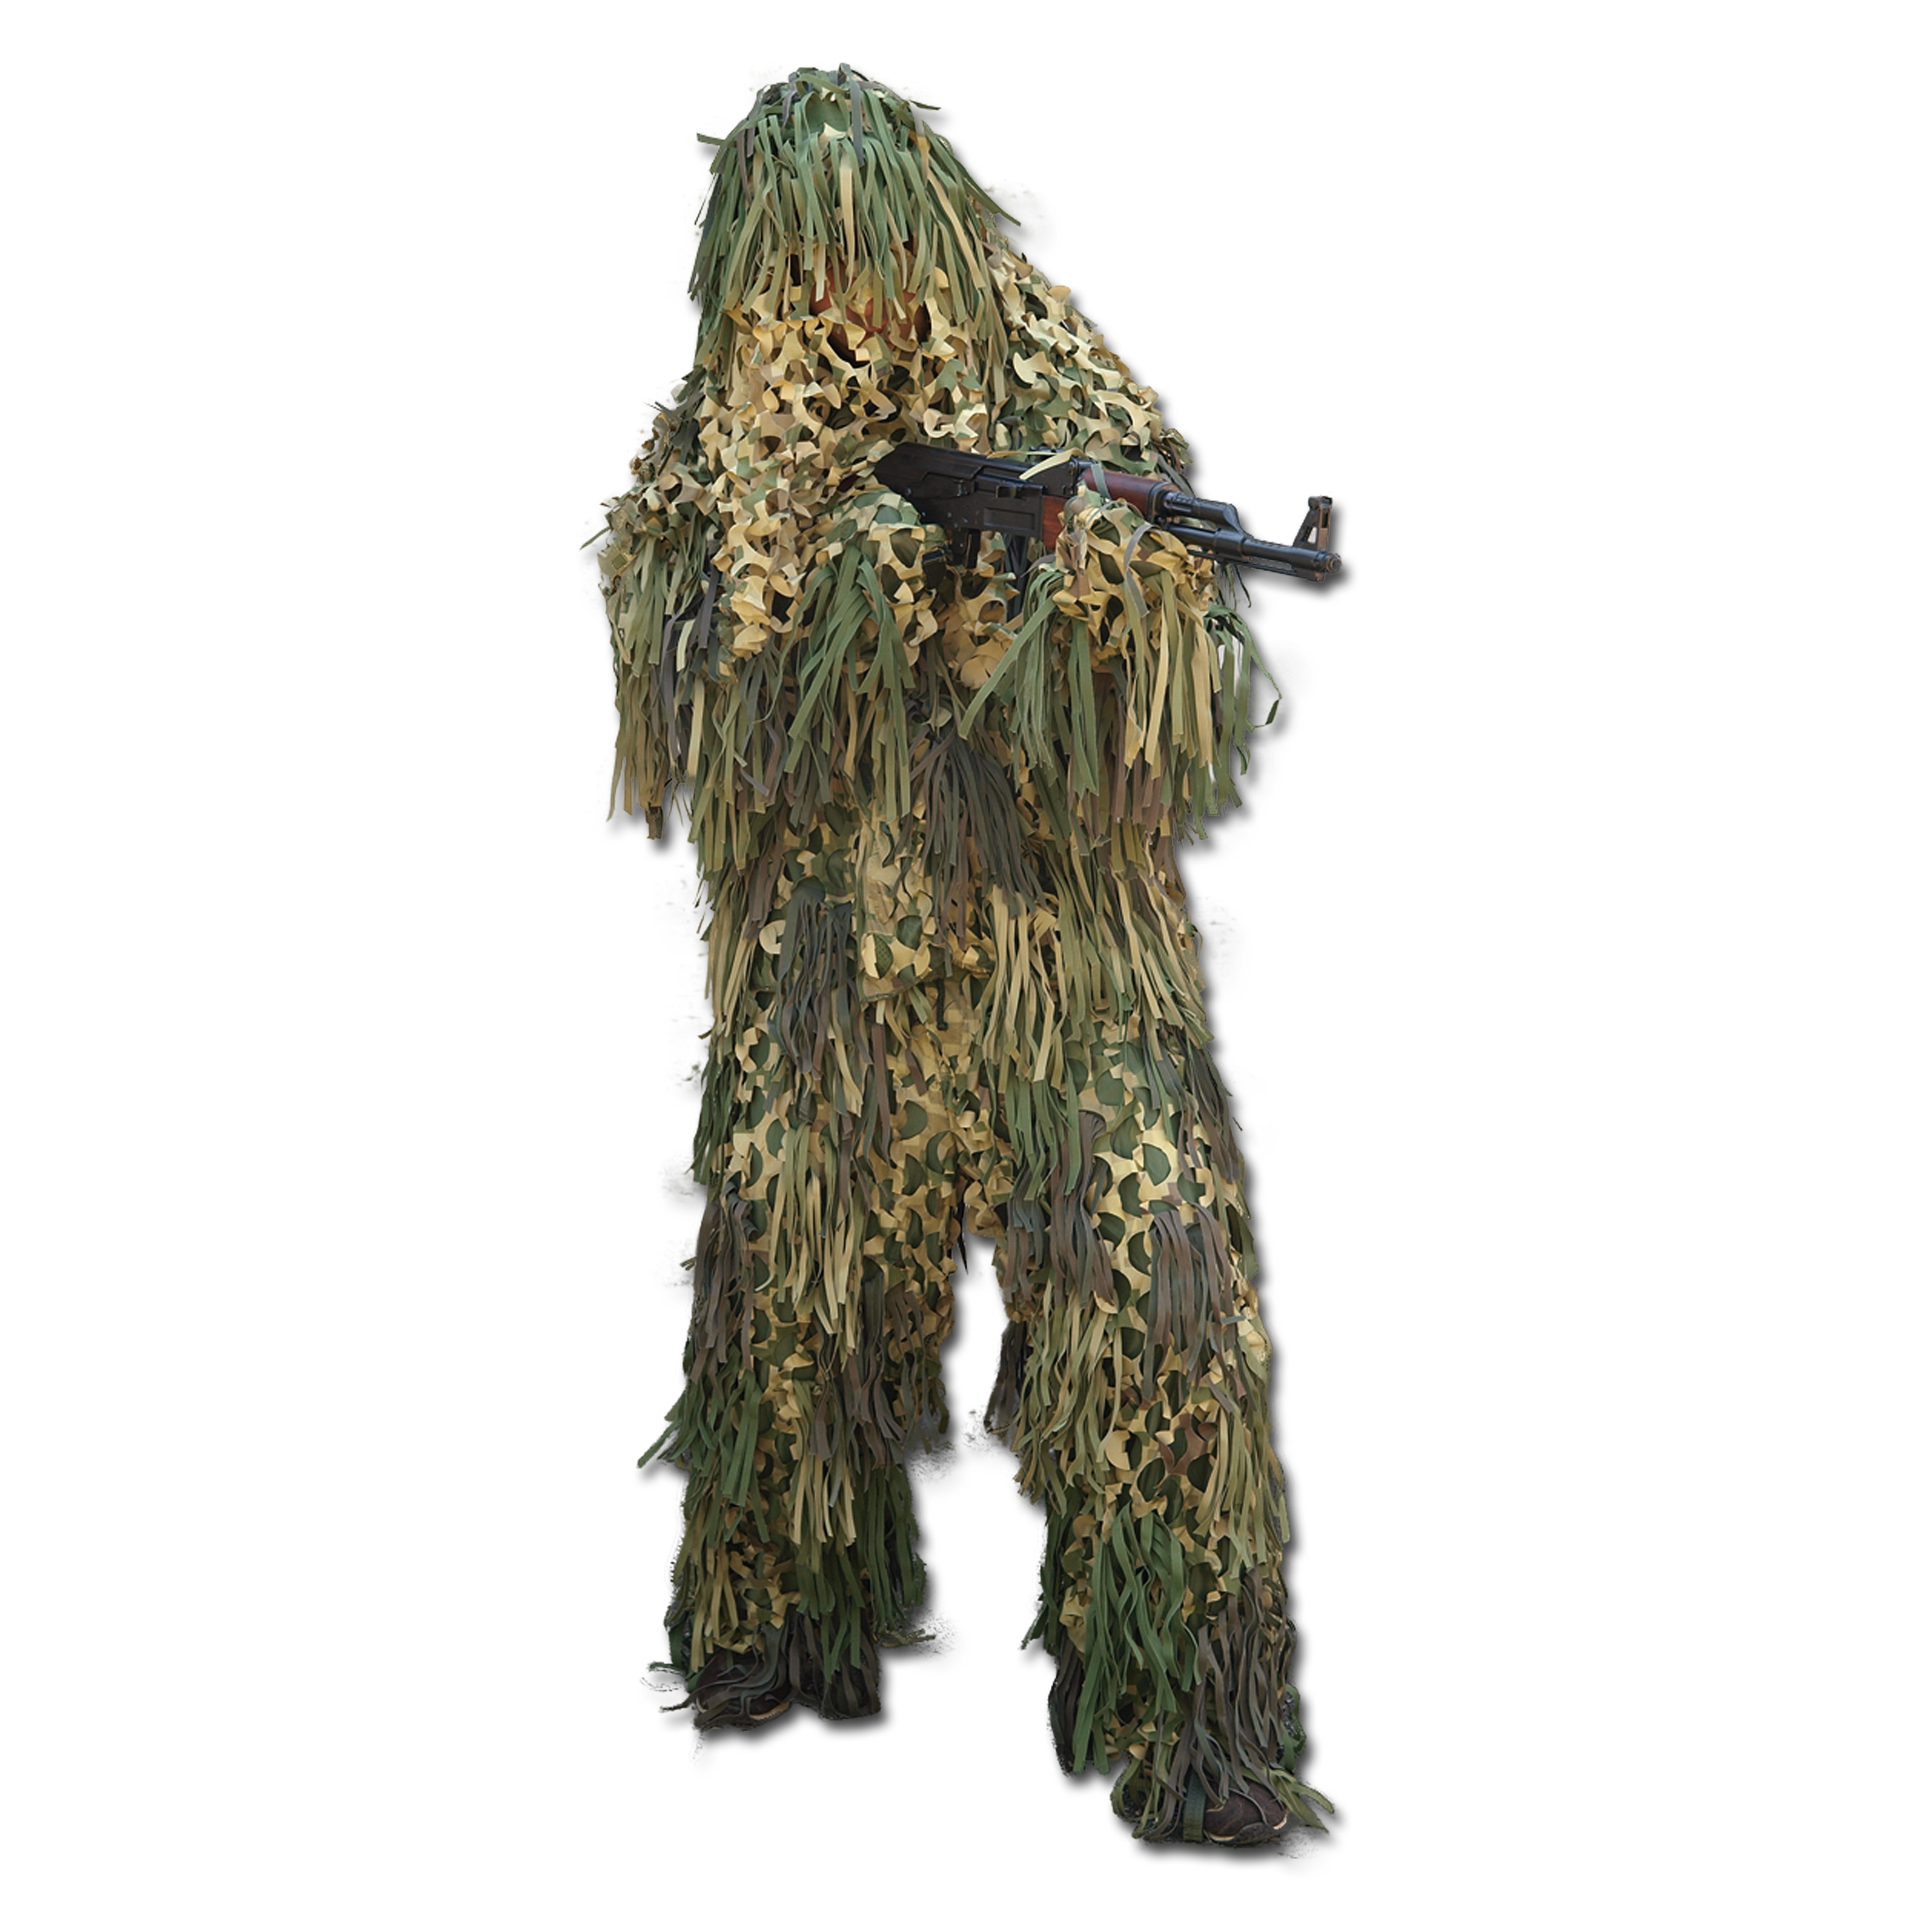 Details about   Jungle Camouflage Ghillie Suits Hunting Sniper Tactical Military Costume jf00 